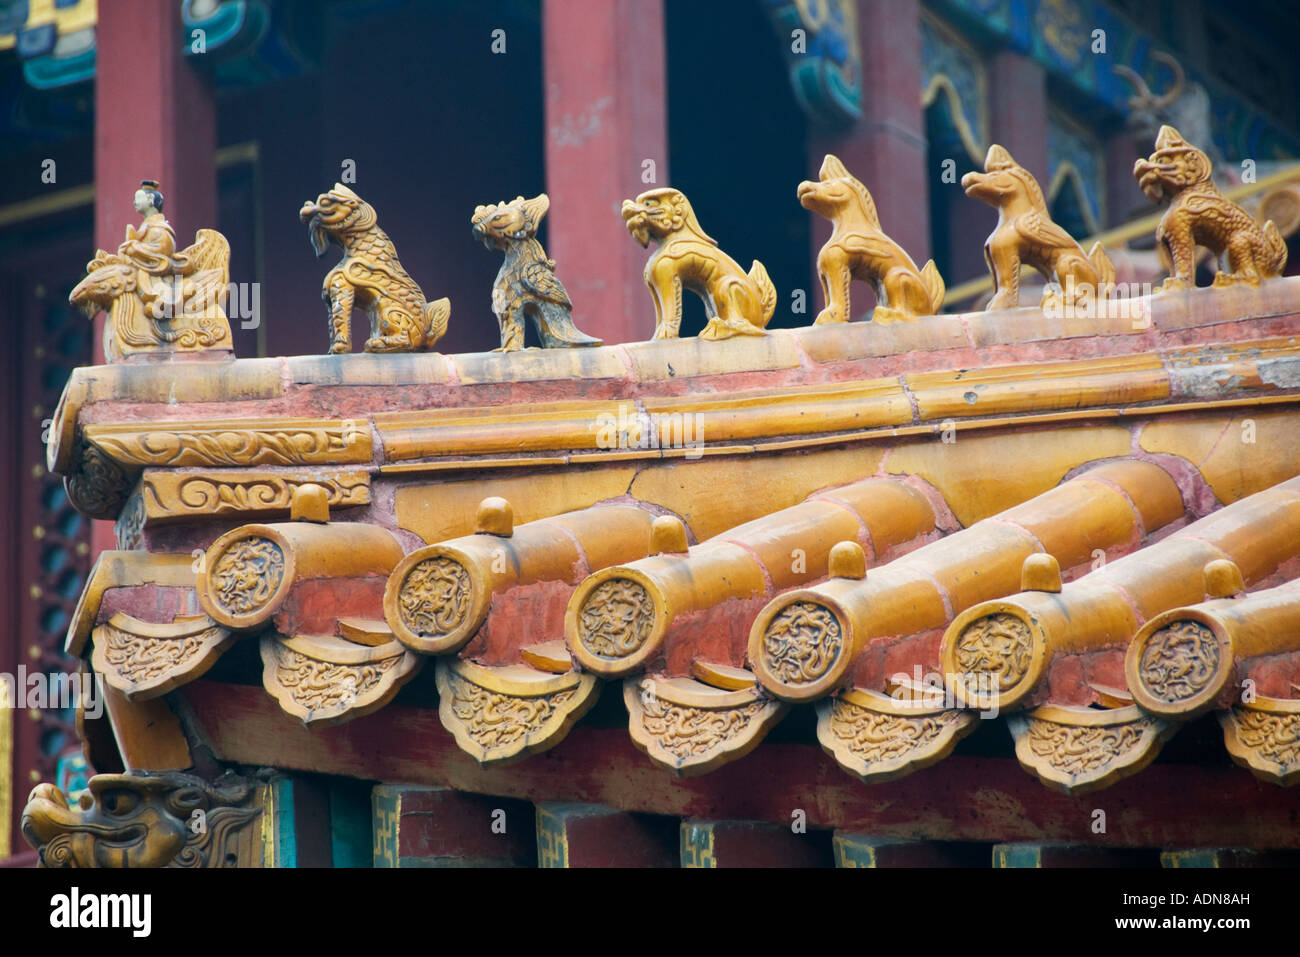 Ornate roof detail with animal figures at Lama Temple Yonghegong in Beijing 2007 Stock Photo